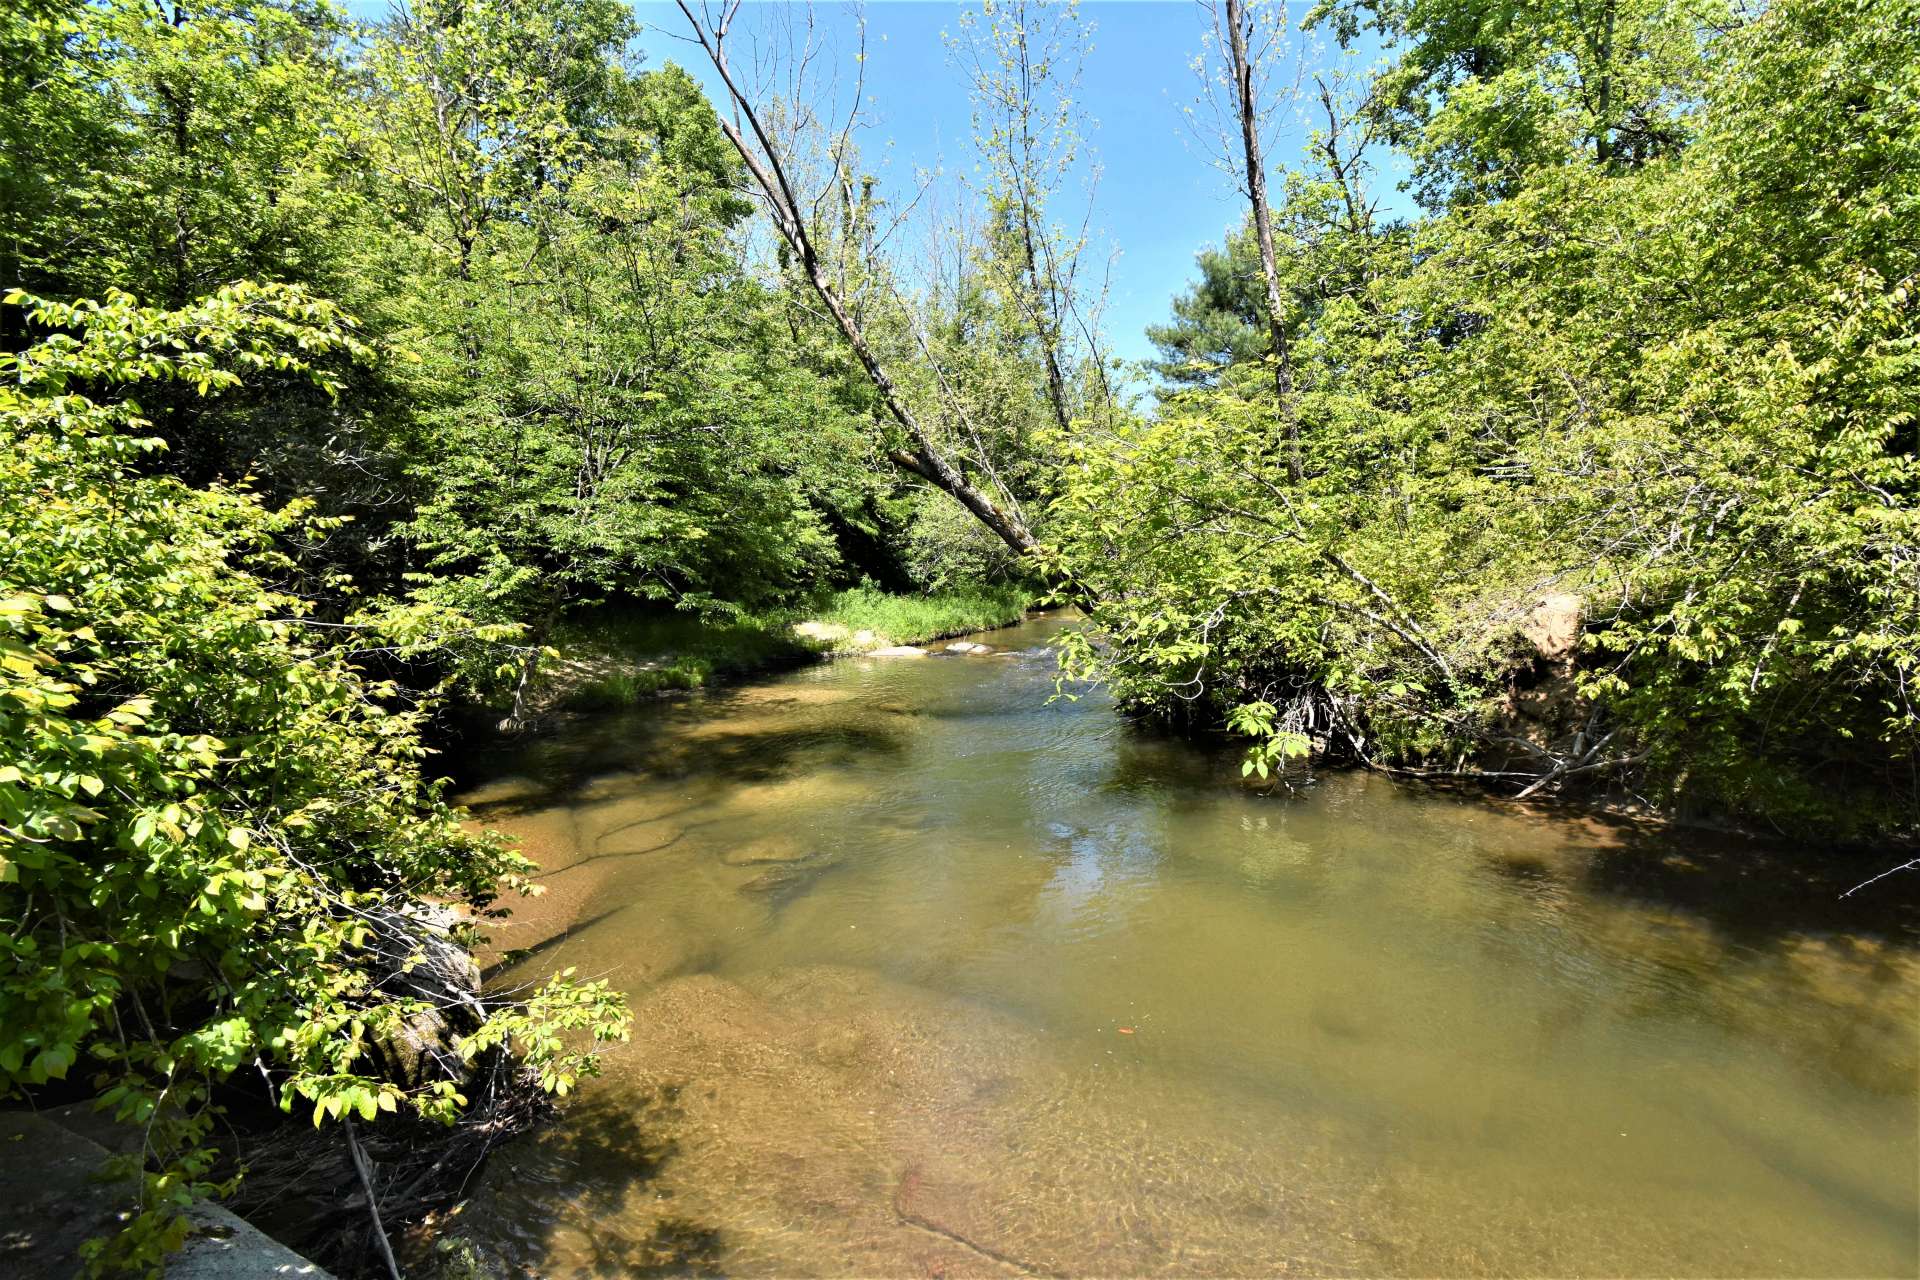 This property is a sportsman's paradise with opportunities for fishing, hunting, riding ATVs or horses, hiking, birdwatching, or just observing Nature.